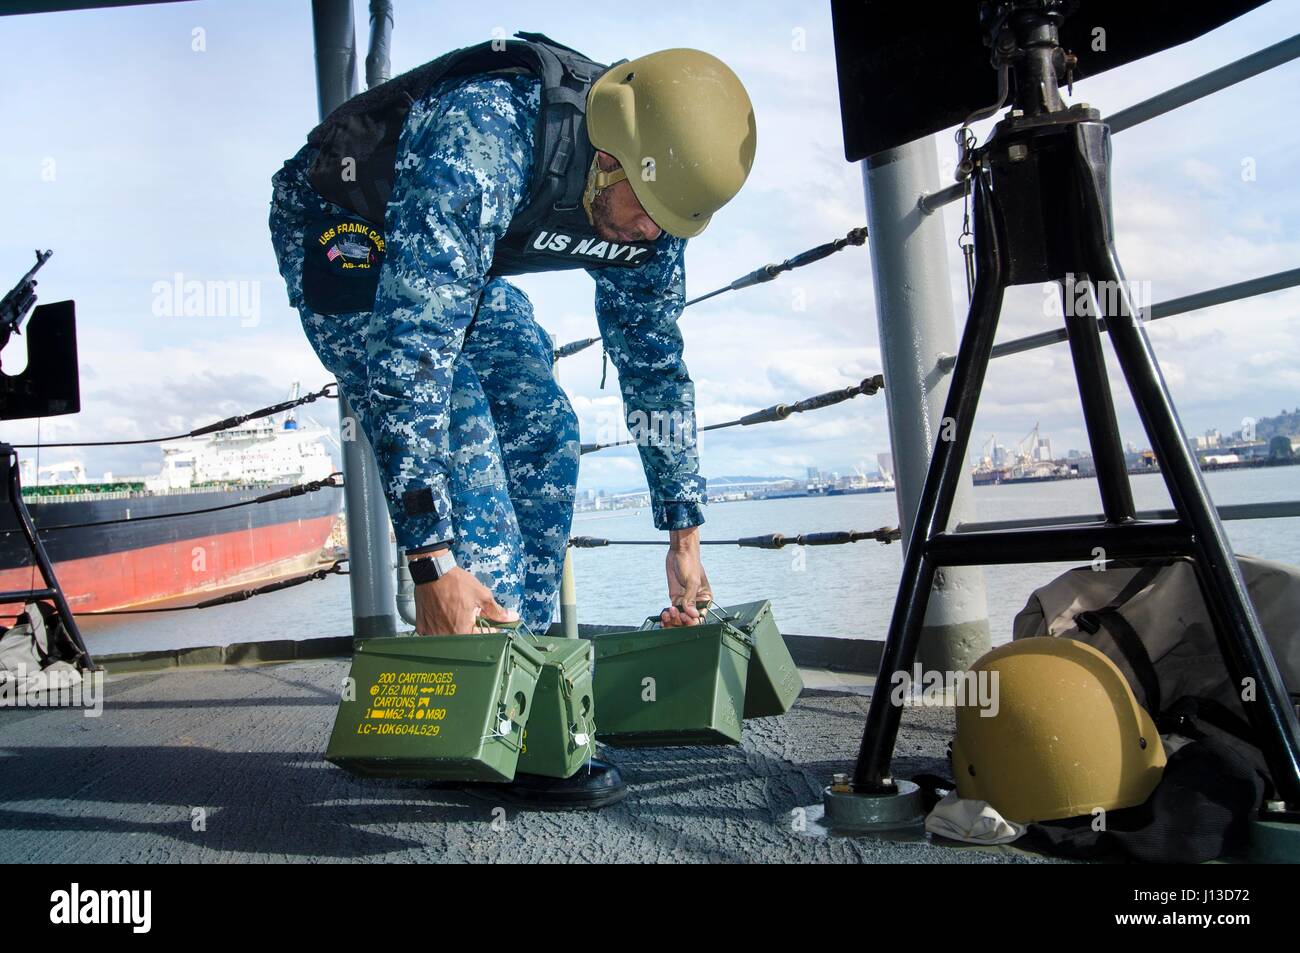 PORTLAND, Ore. (April 6, 2017) - Boatswain's Mate 3rd Class Brandon Elliott, a native of Sanford, N.C. and assigned to the submarine tender USS Frank Cable (AS 40), secures the weapons watch from sea and anchor, after transiting the Columbia River to Portland, Ore., April 6. Frank Cable is in Portland, Ore. for a scheduled dry-dock phase maintenance availability.  (U.S. Navy photo by Mass Communication Specialist 3rd Class Alana Langdon/Released) Stock Photo